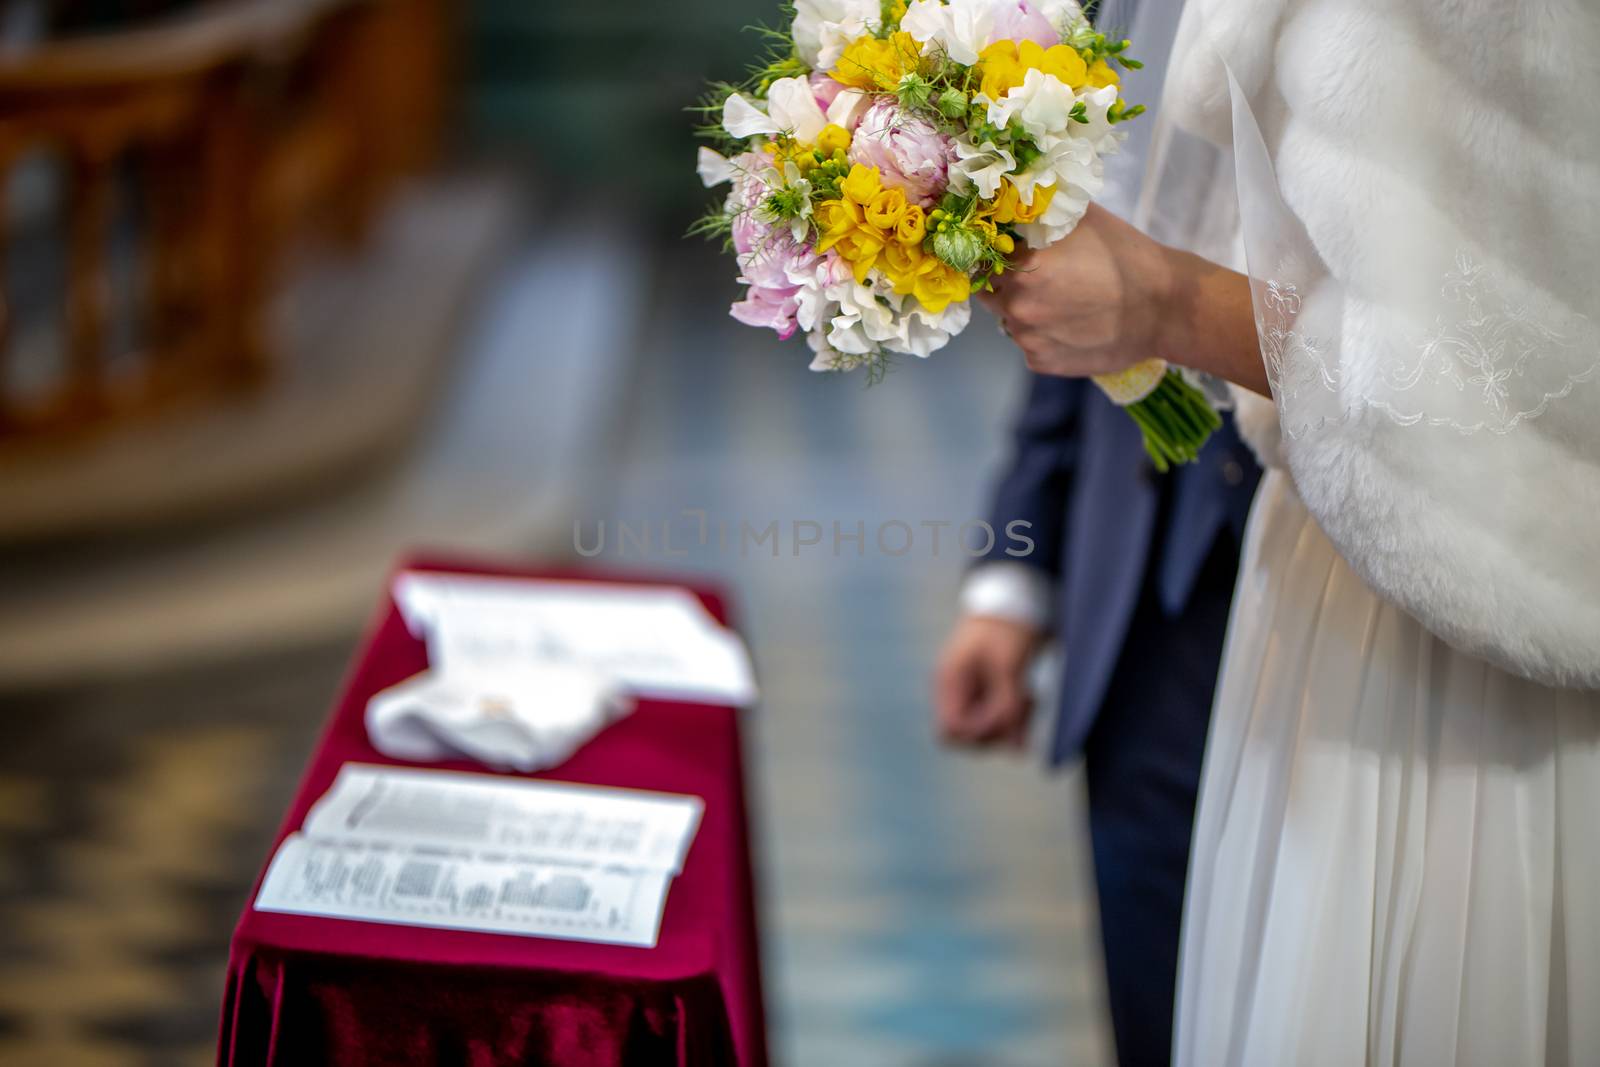 The bride holds a wedding bouquet of beautiful flowers in her hand. The bouquet consists of white, yellow and pink flowers. Marriage registration certificate and grom's hand is In the blur area. Bouquet of flowers in the hand of the bride during the marriage ceremony.